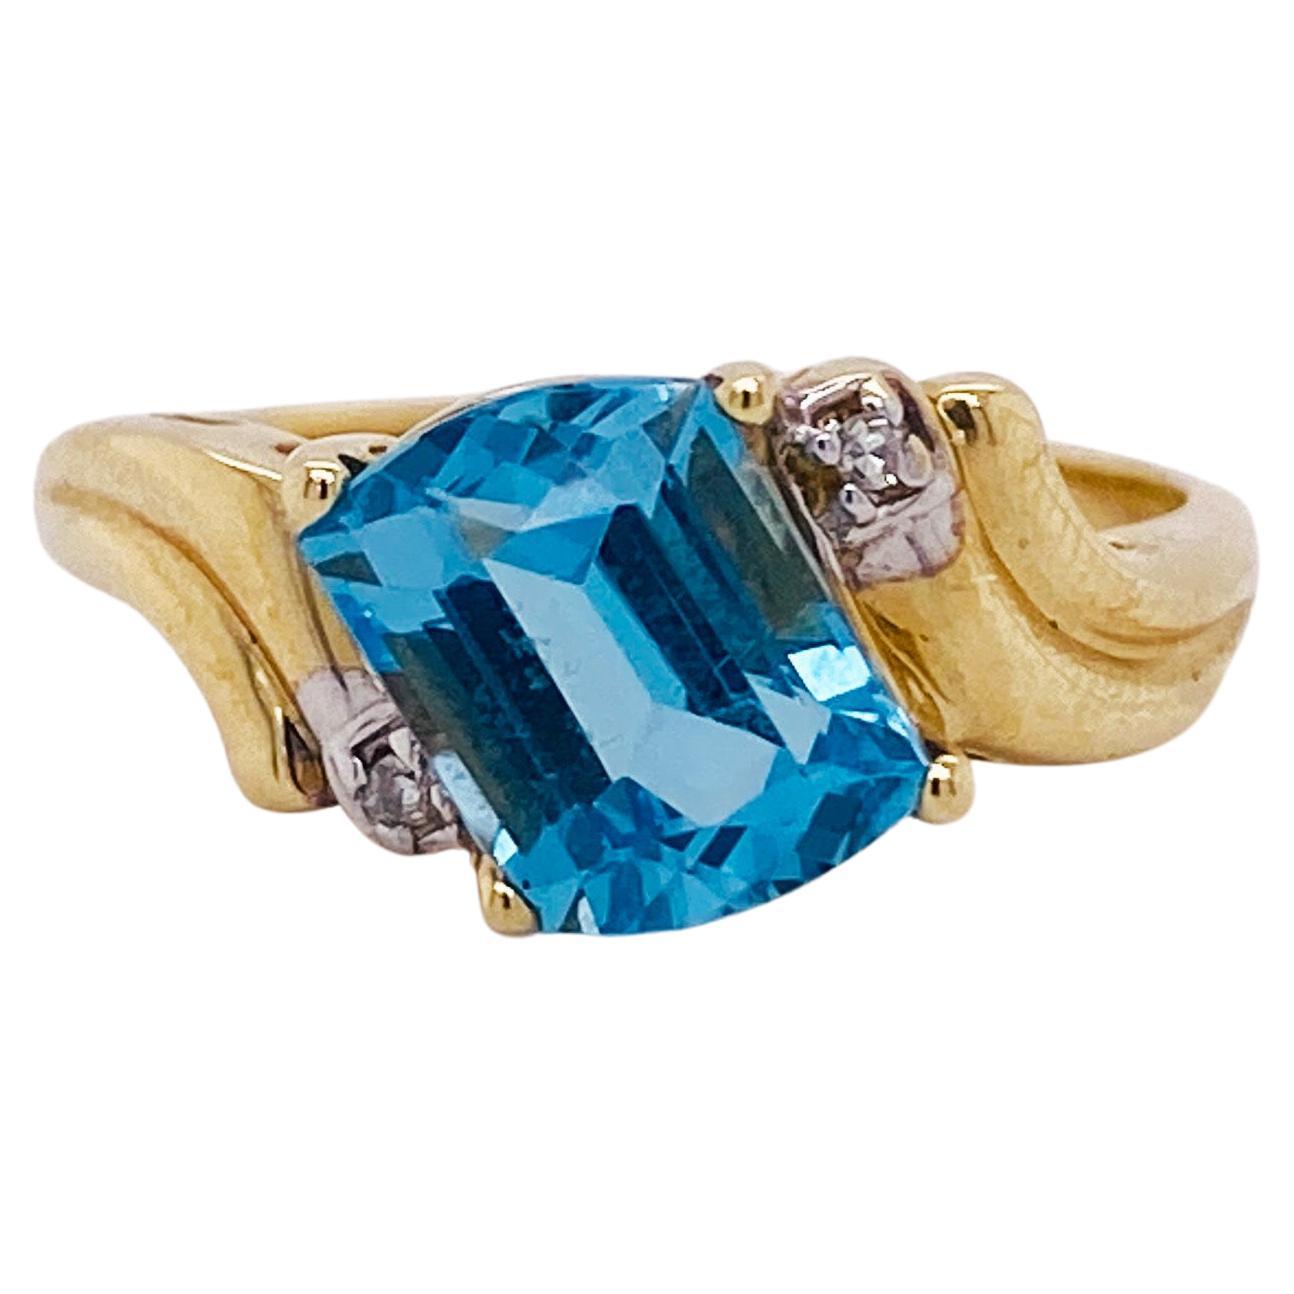 1.25 Carat Fancy Cut Blue Topaz, 14k Gold Bypass Ring with Diamond Accents